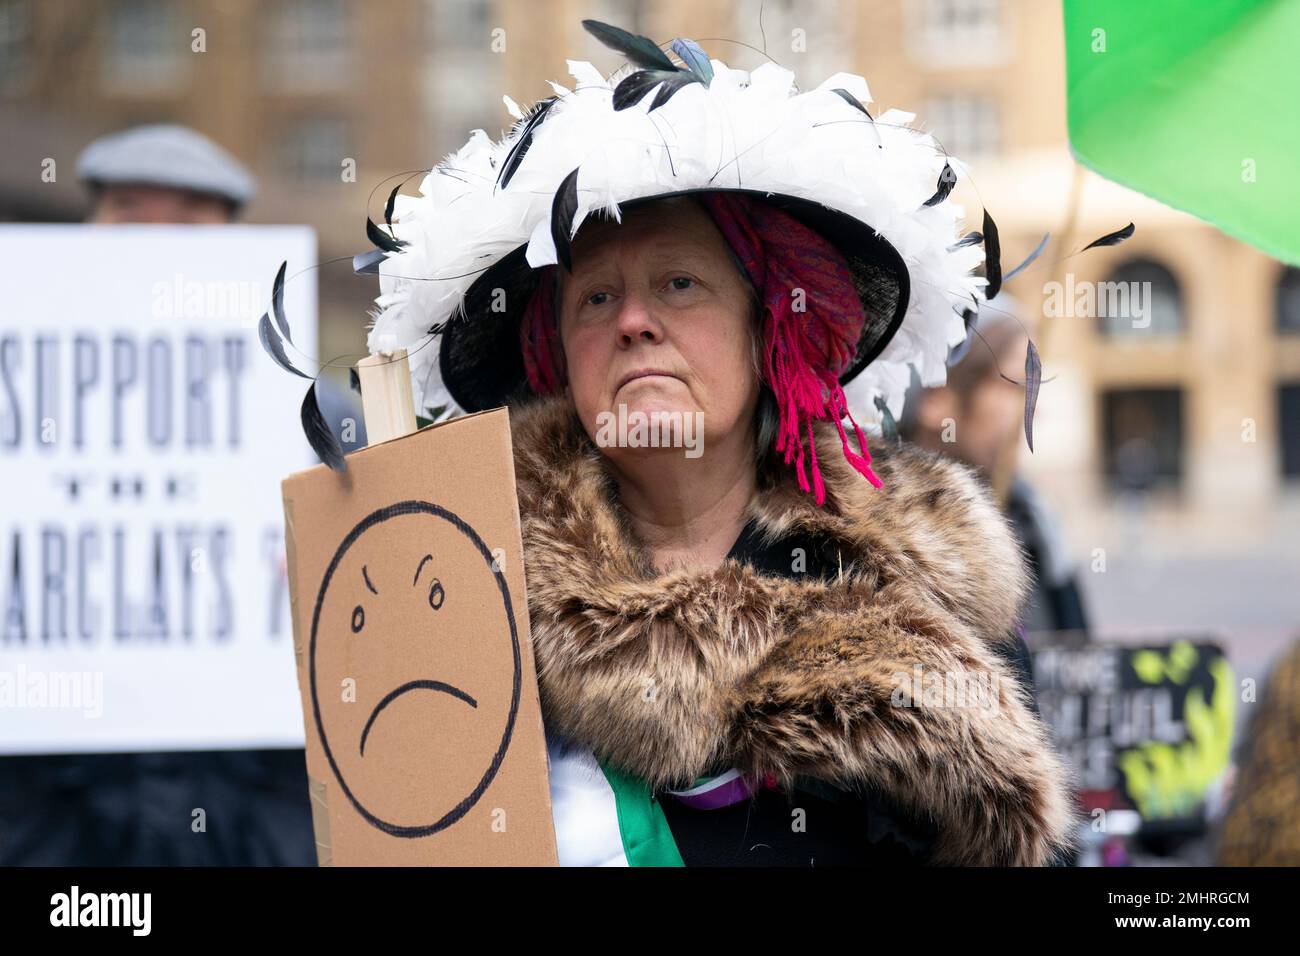 An activist dressed as a Suffragette protests outside Southwark Crown Court, London, where climate protesters Carol Wood, Sophie Cowen, Lucy Porter, Gabriella Ditton, Rosemary Webster and Zoe Cohen are appearing for sentencing after they were found guilty of causing almost £100,000 in damage for smashing glass windows at the London headquarters of Barclays bank. Picture date: Friday January 27, 2023. Stock Photo